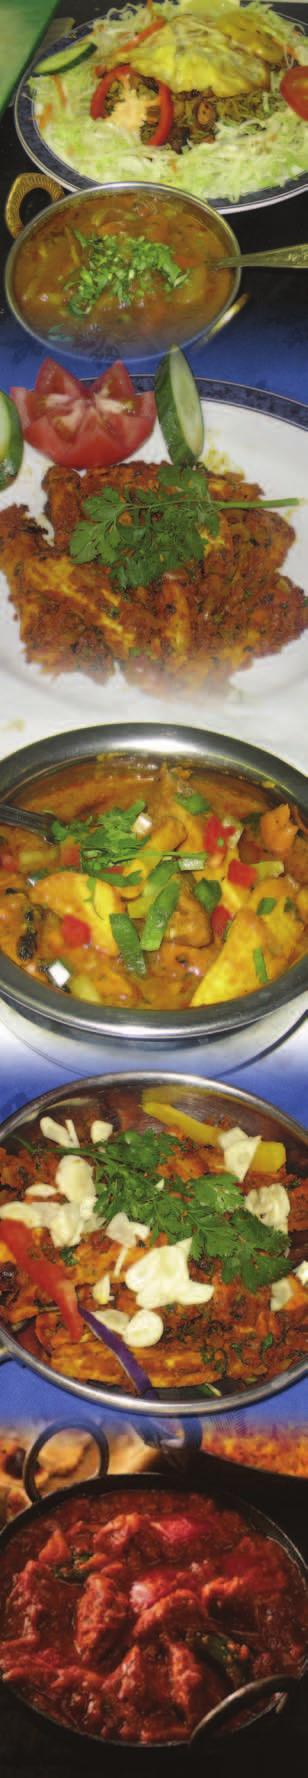 taste Buttered Massala...Chicken 7.95 Lamb 7.95 King Prawn 9.95 spring chicken, lamb or King prawns barbecued in clay oven before cooked in butter and a special blend of rich creamy sauce Passanda.